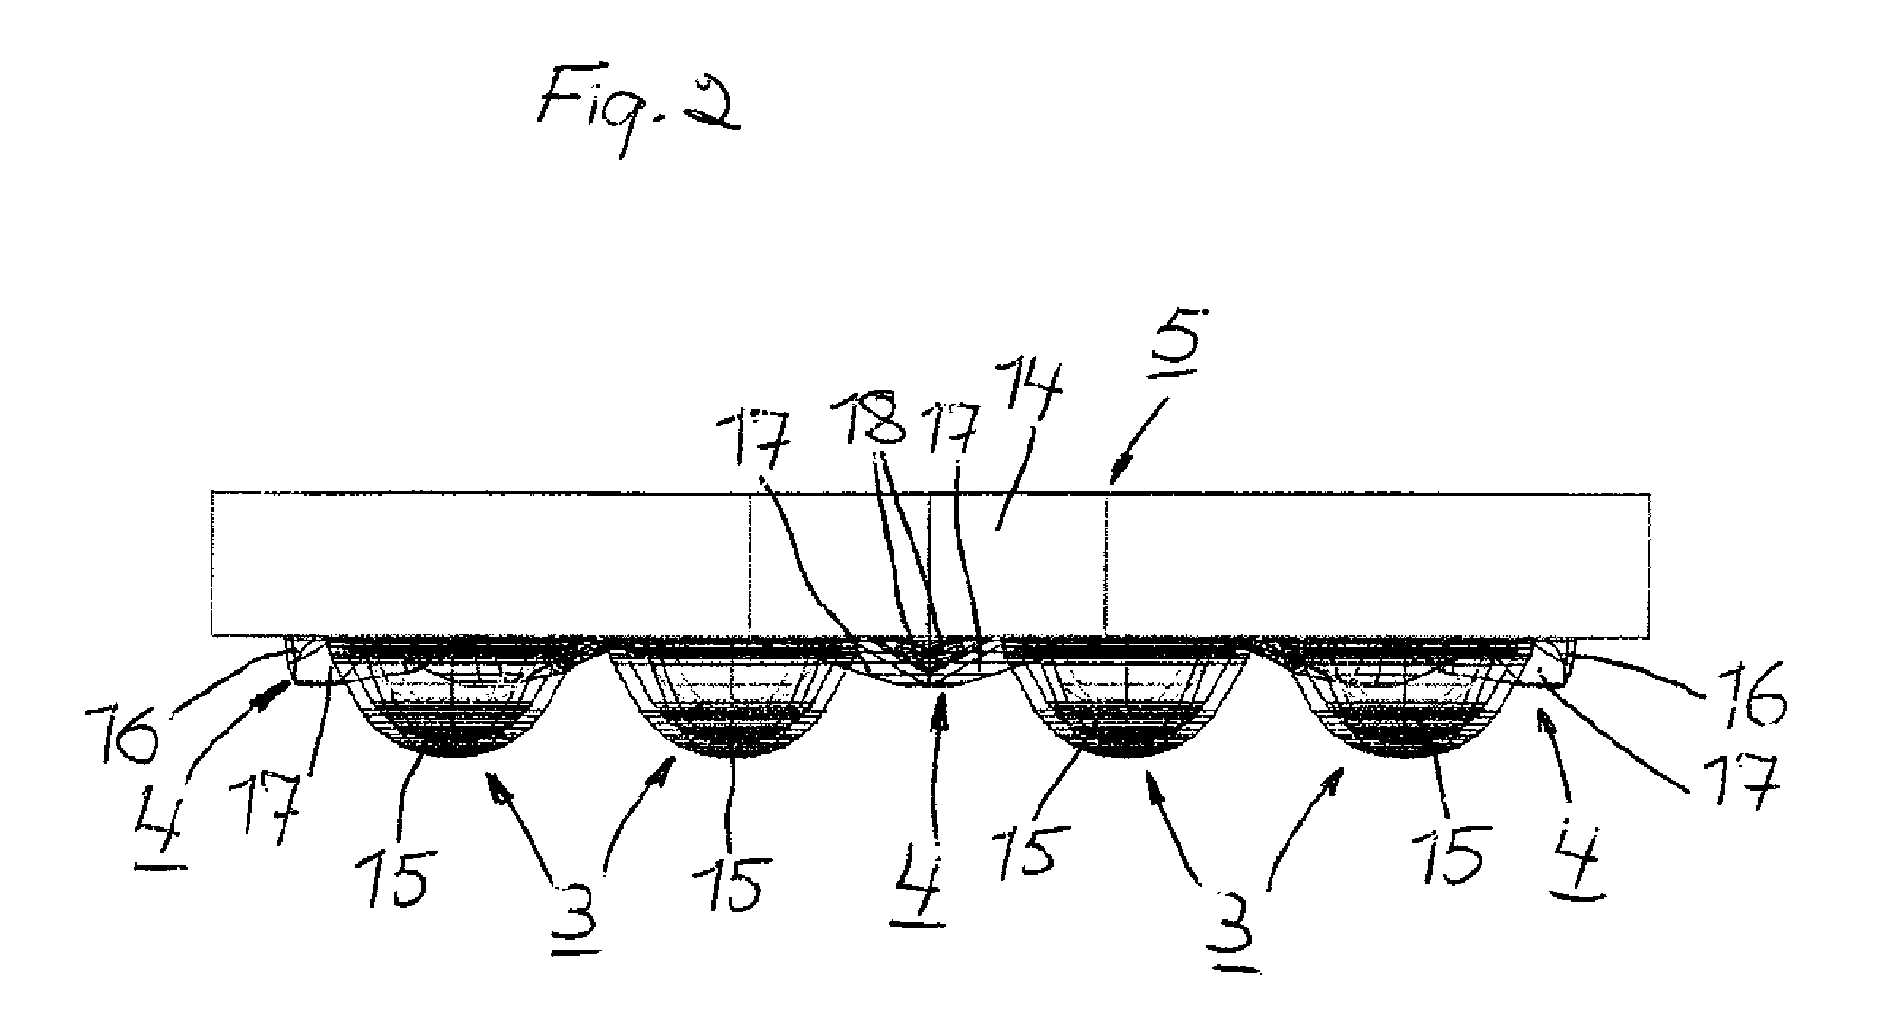 Ventilating device for providing a zone of clean air